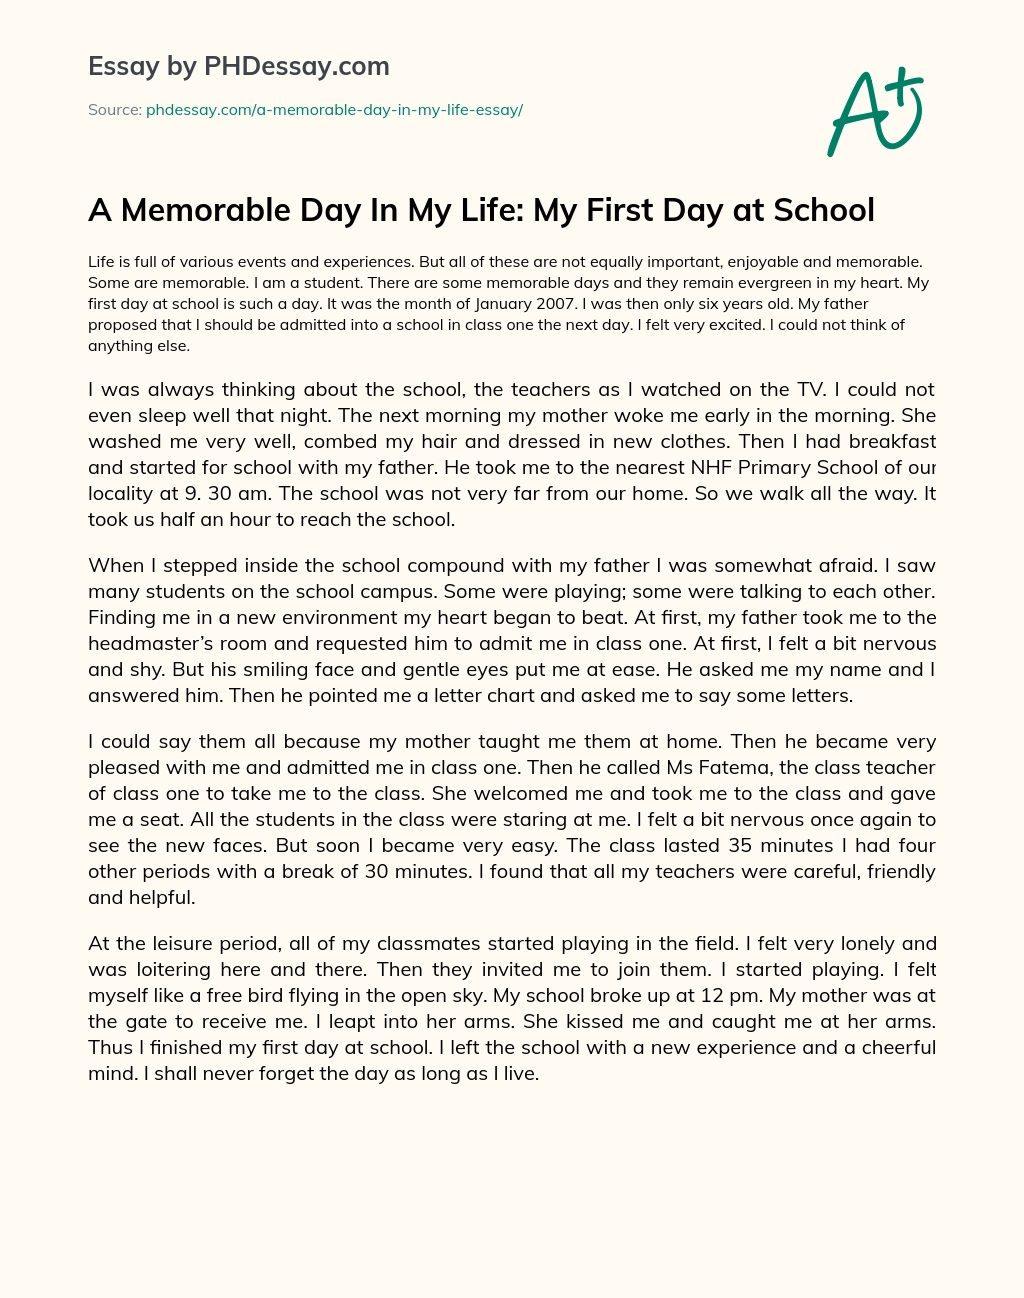 write an essay about special moment in my life